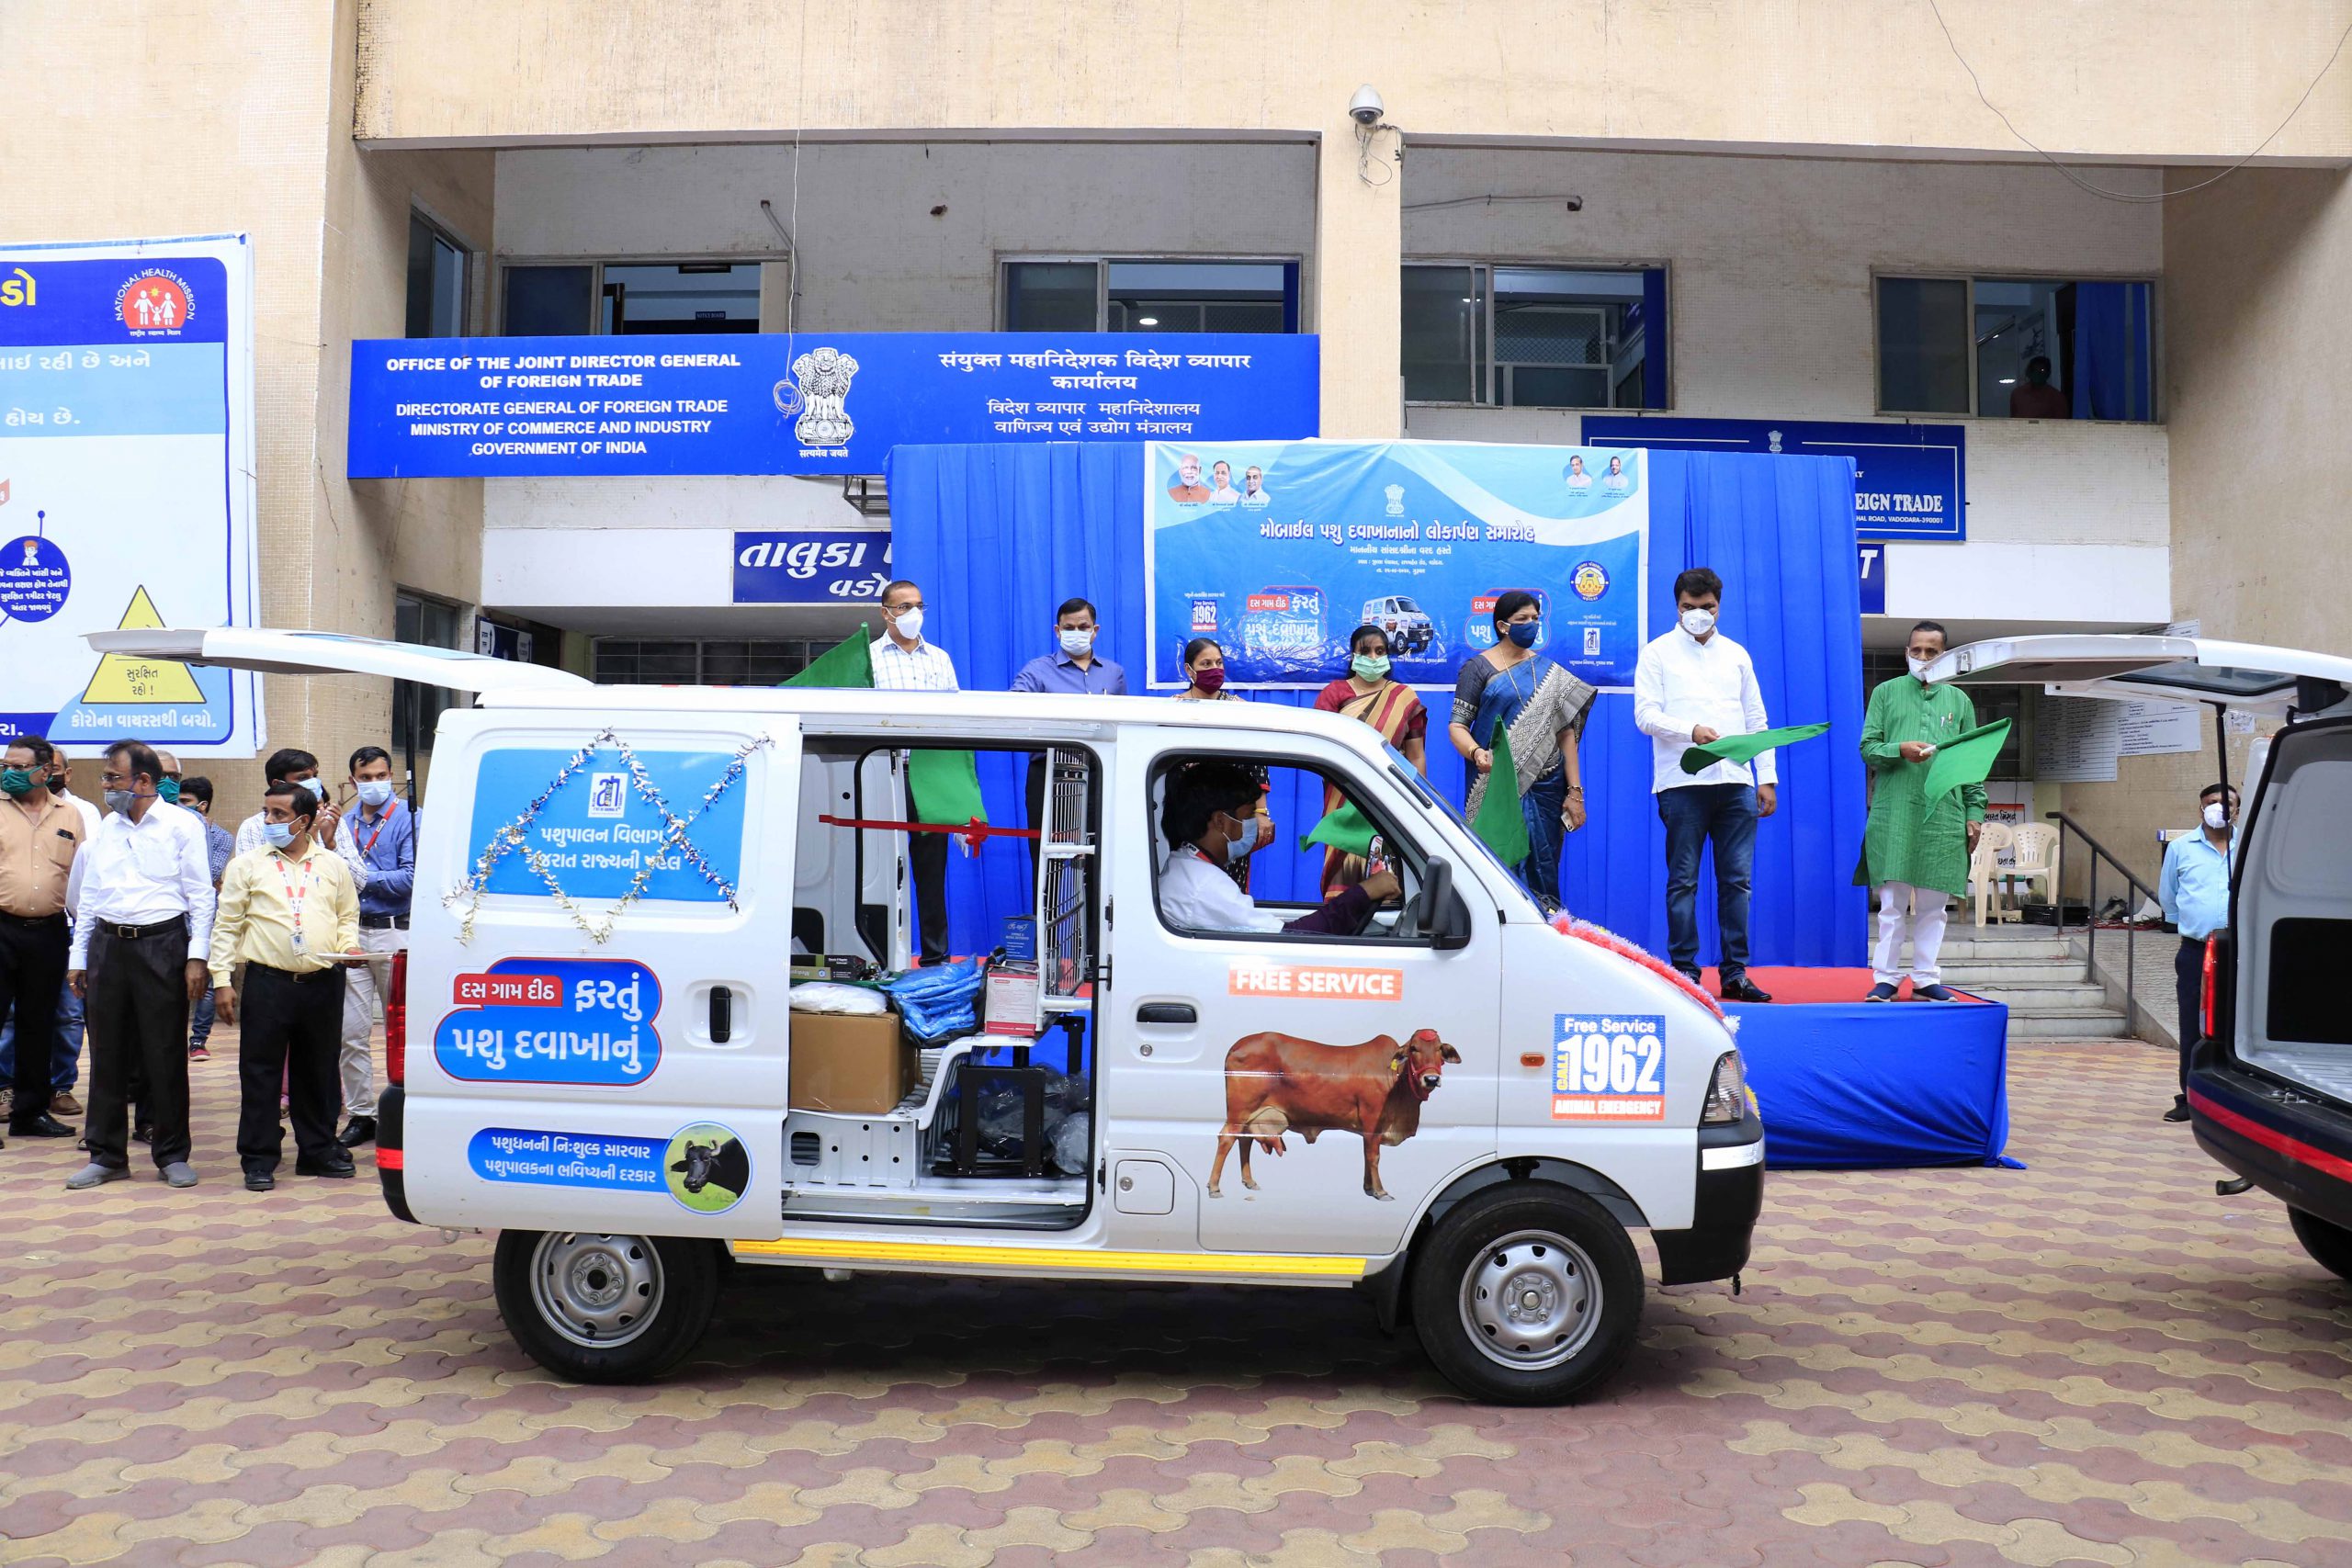 Gujarat government starts 1962 service for immediate veterinary treatment  of animals